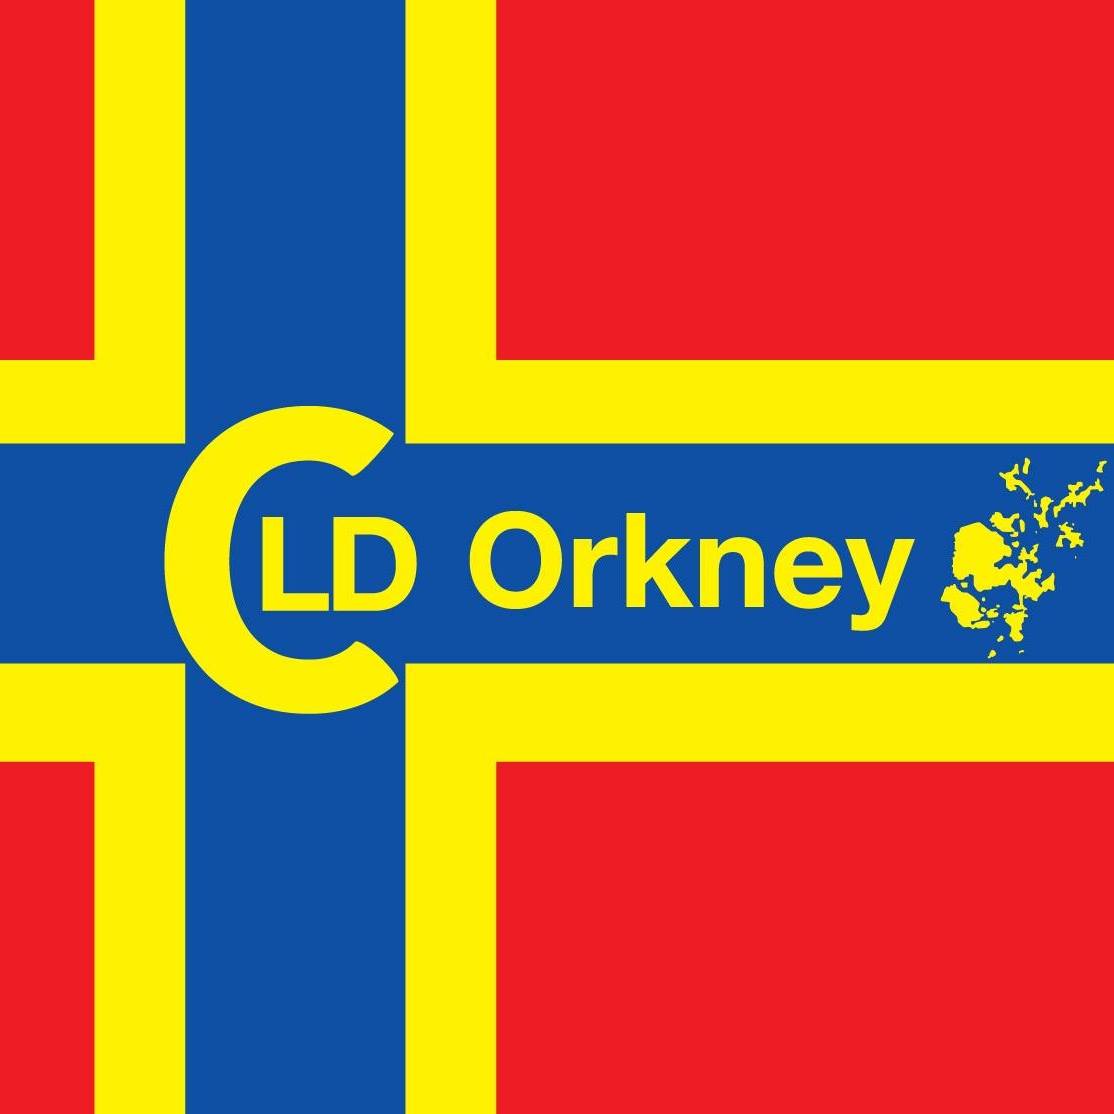 Orkney CLD on Facebook